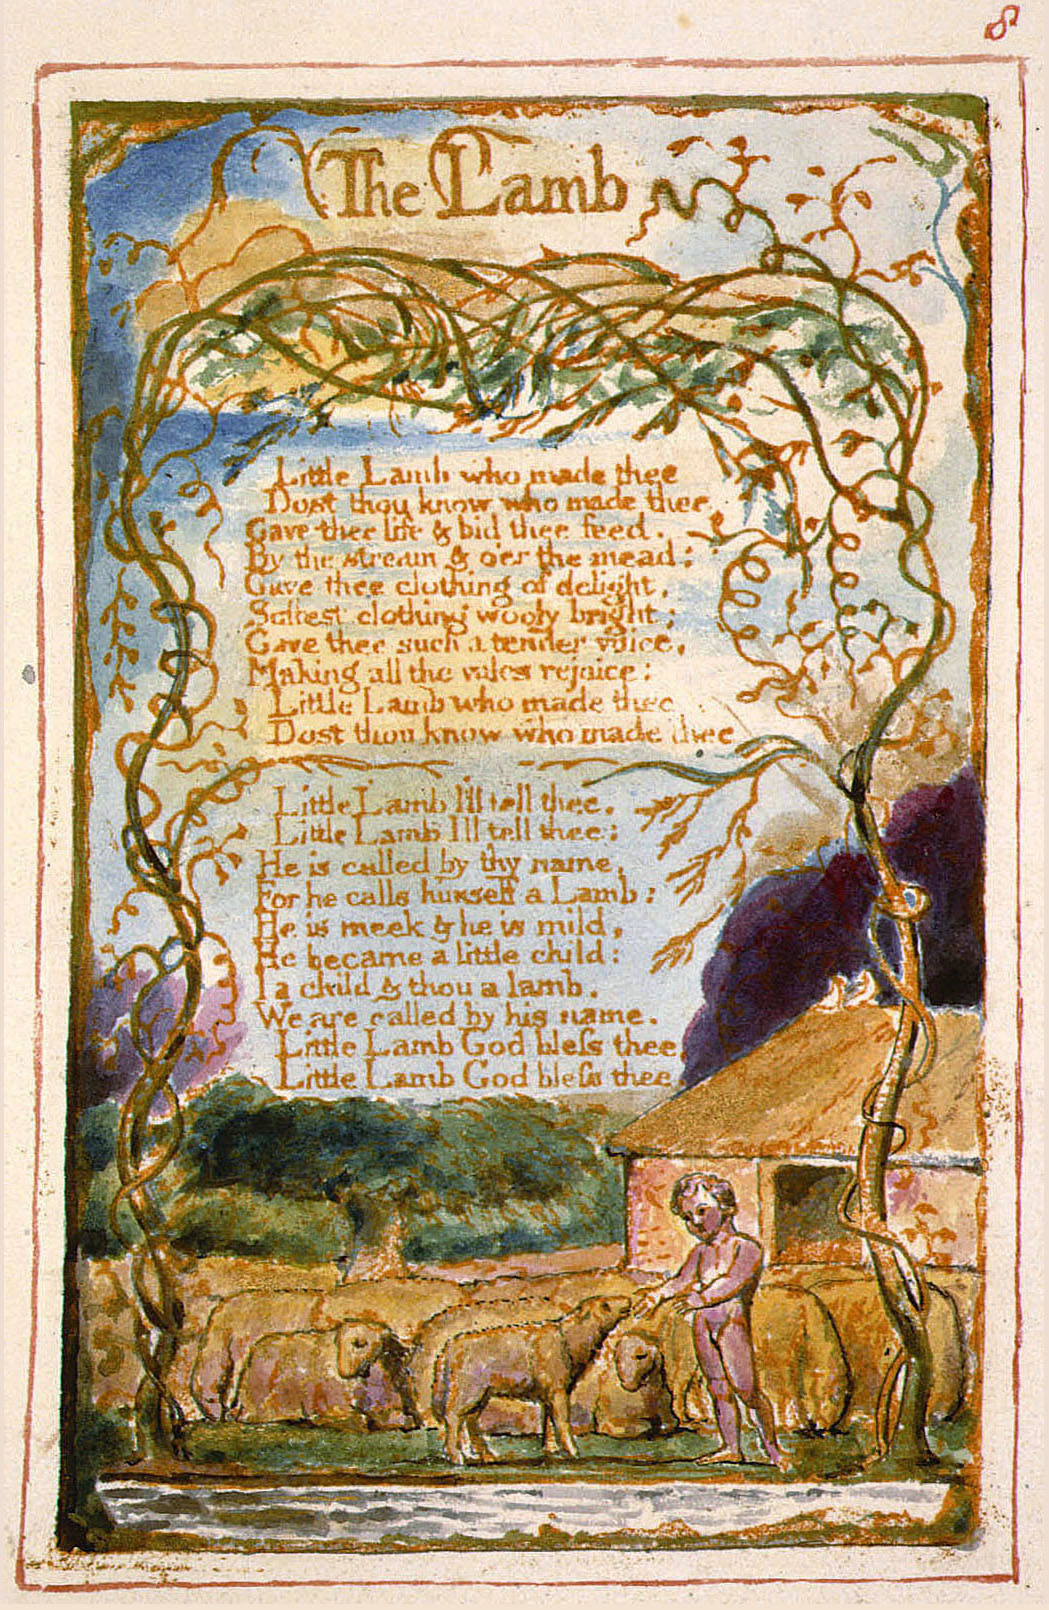 Summary Of The Lamb By William Blake